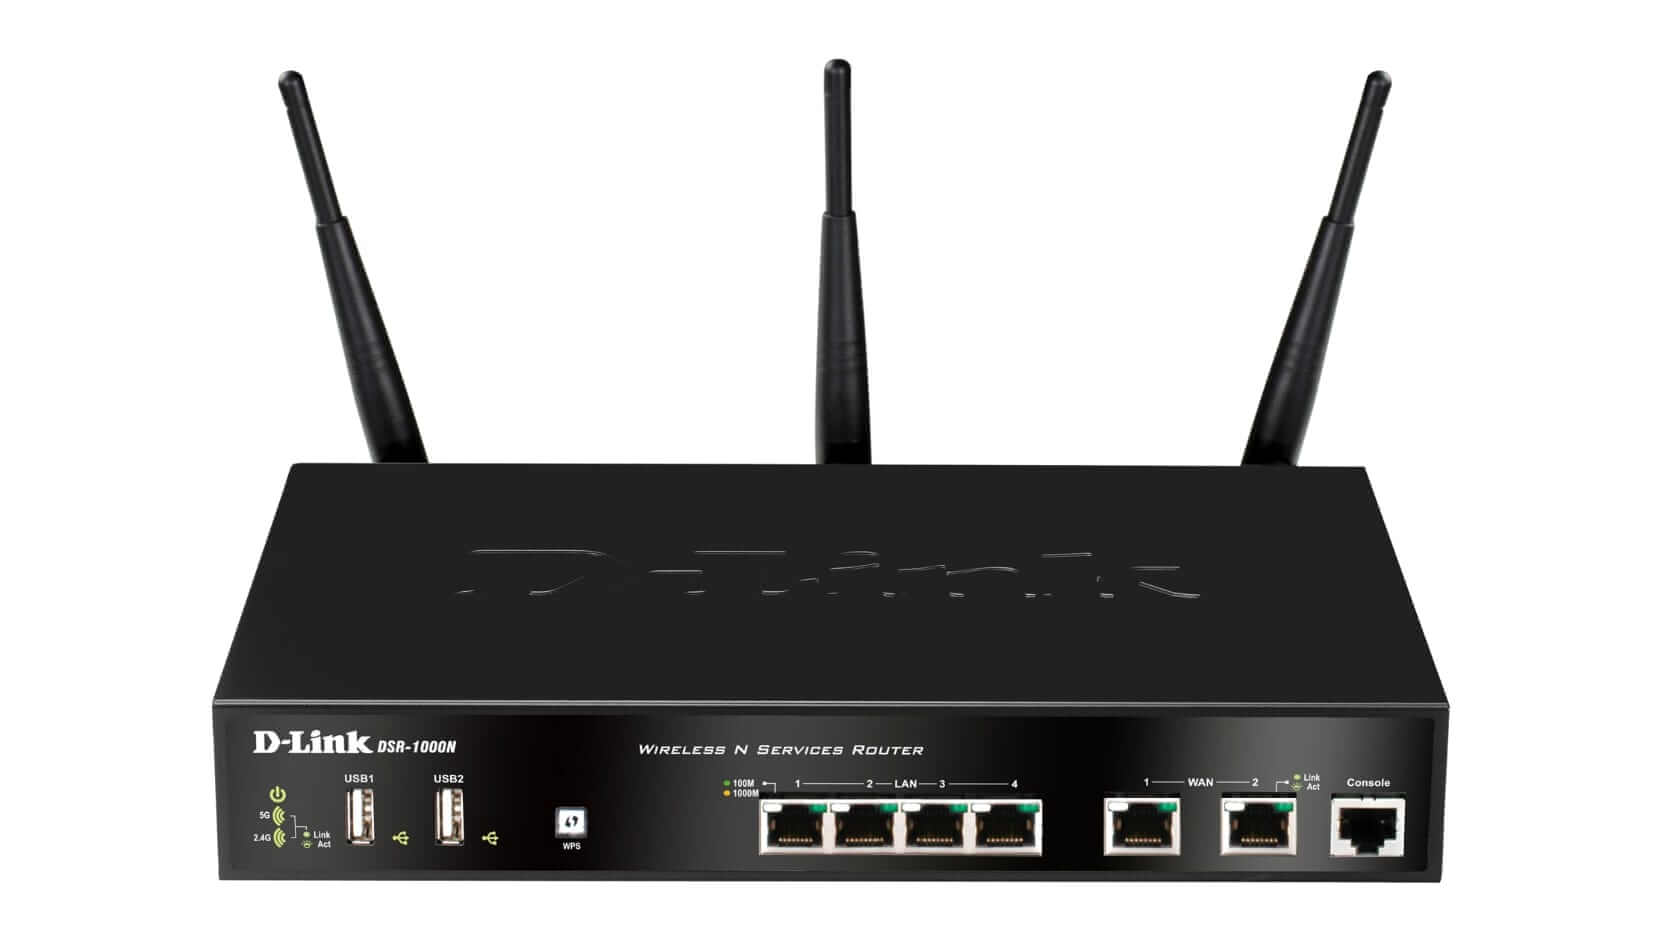 D-LINK VPN BUSINESS ROUTER 2X WAN PORTS WIRELESS N DUAL BAND